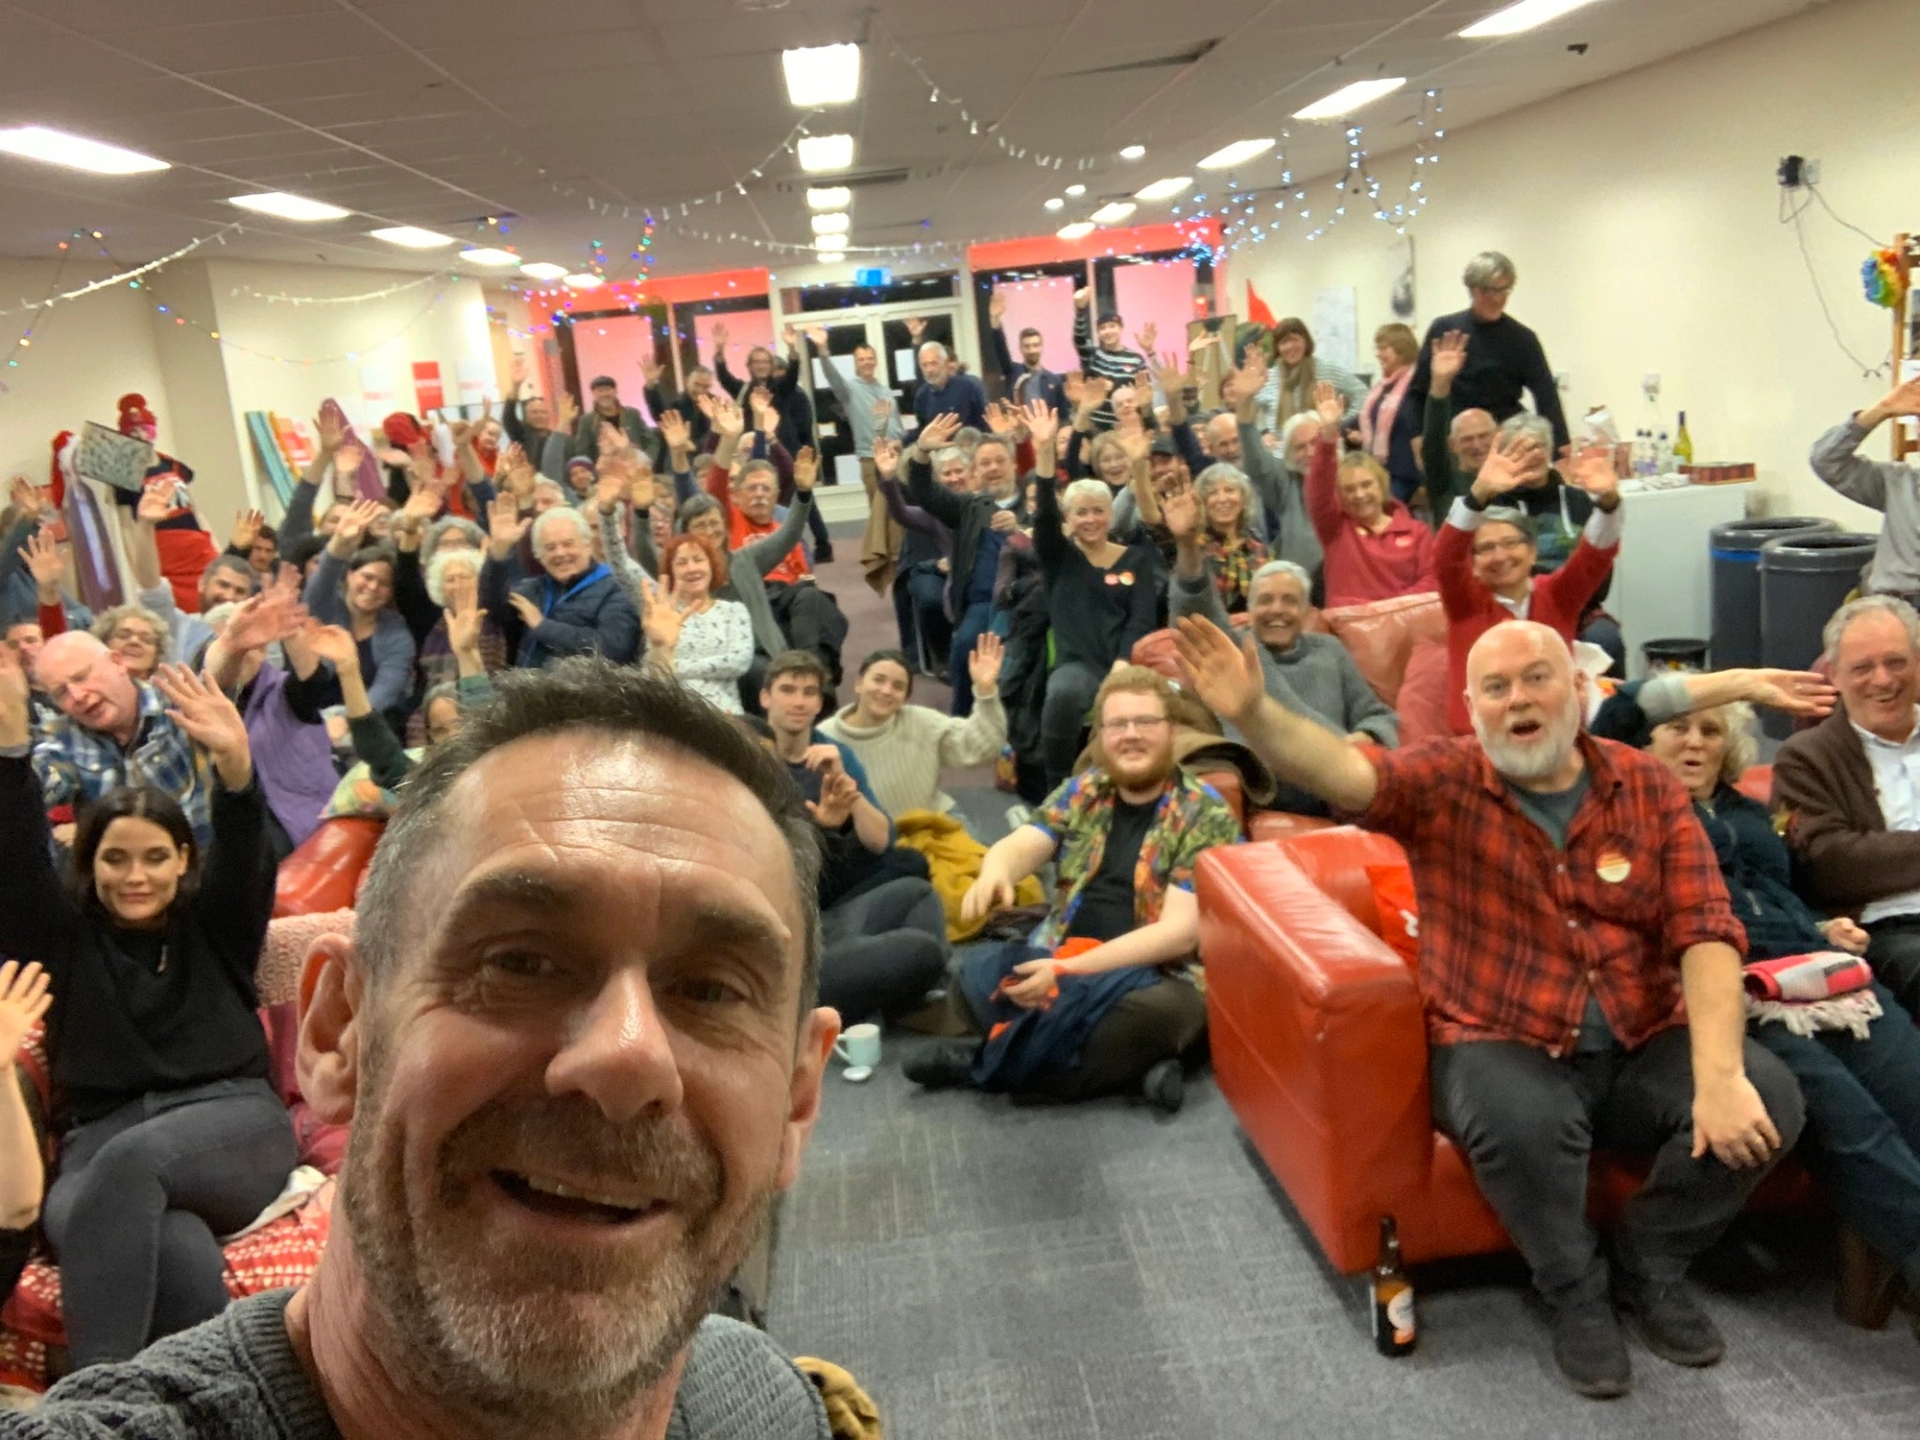 @paulmasonnews Dec 8 Fantastic discussion in Stroud - recruited some new members - these are ppl who've been on the doors all weekend and turned up to talk about the politics and economics of the election. Inspired - Vote @DavidEDrew on Thurs